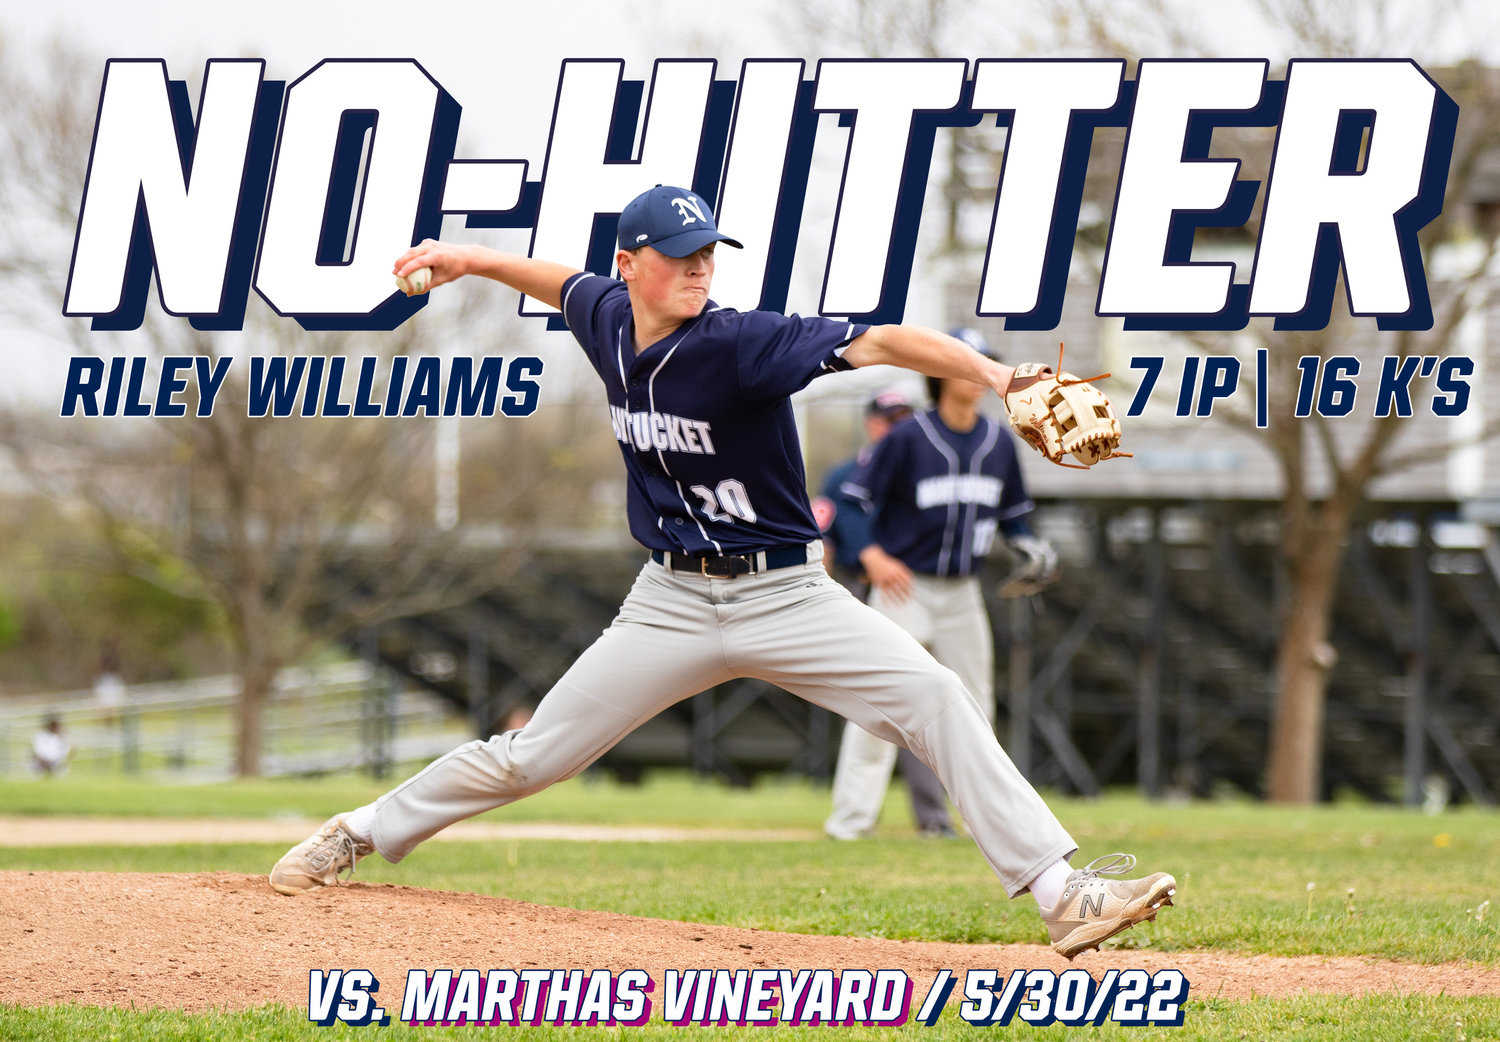 Nantucket's Riley Williams no-hit Martha's Vineyard Monday, striking out 16 batters in the Whalers' 4-0 win.